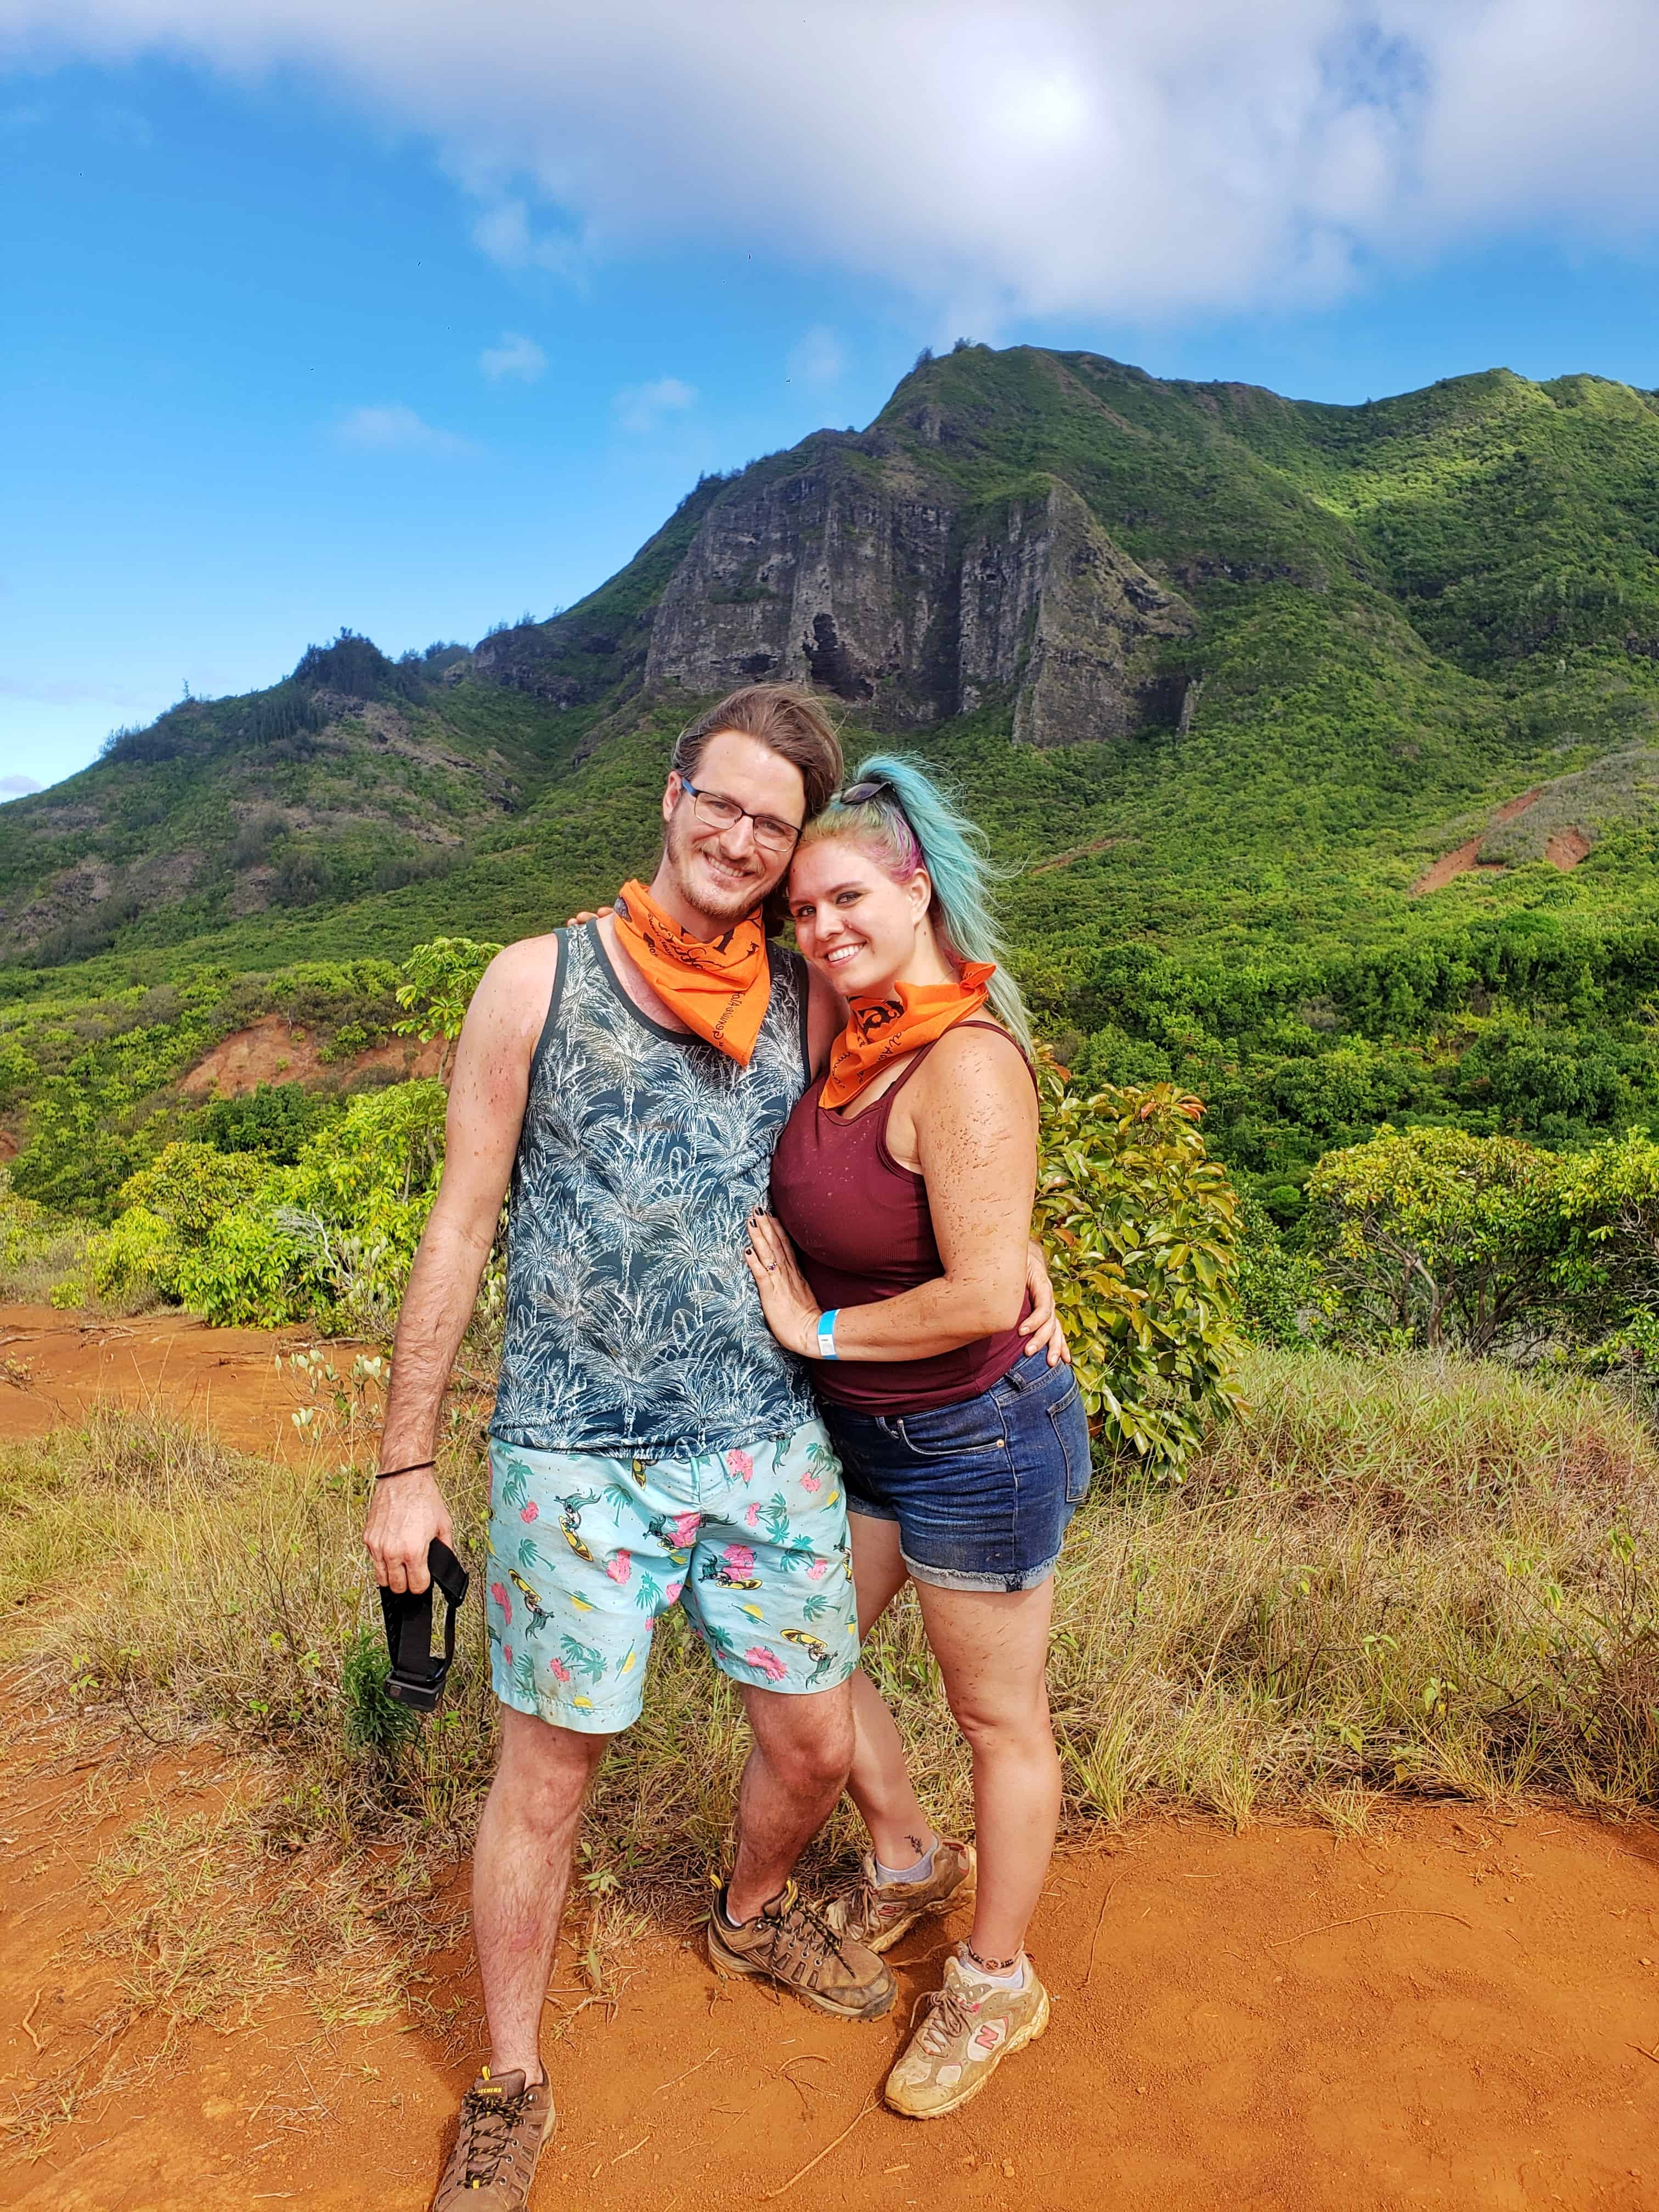 A man and a woman pose next to each other for a picture. The backdrop is of a tall, tropical mountain.